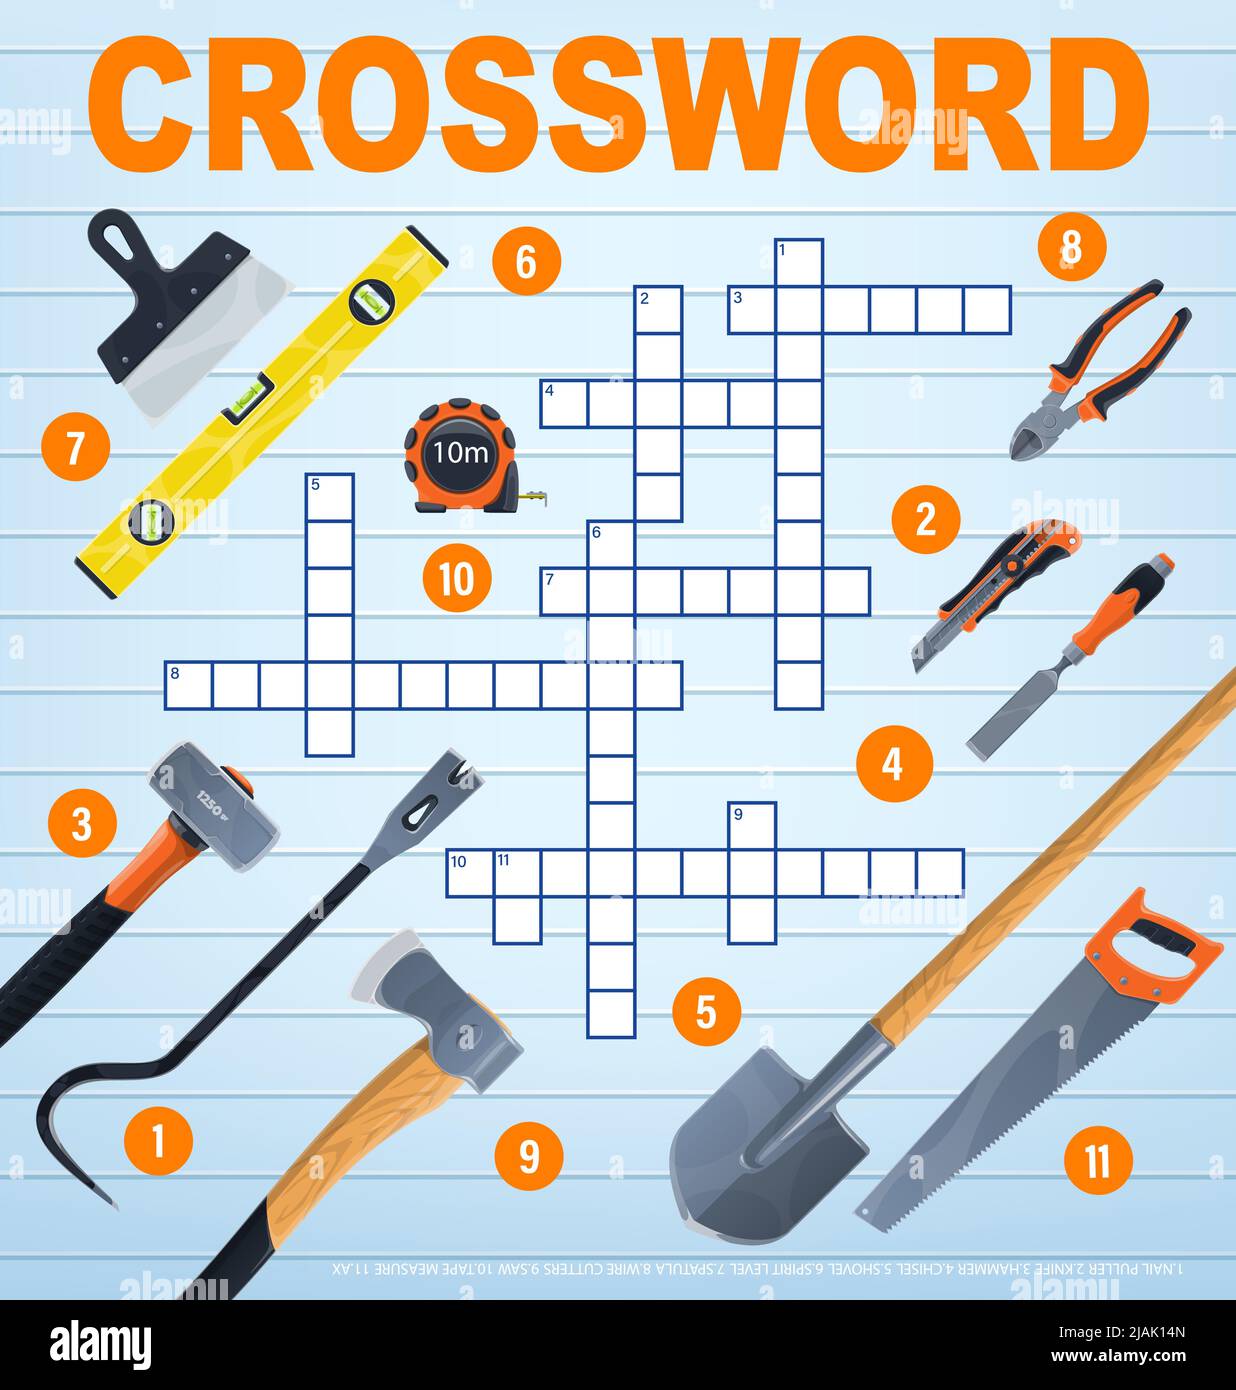 DIY repair tools, crossword grid to find word, vector quiz game riddle.  Crossword worksheet to guess words of nail puller, knife and hammer,  woodwork chisel and carpentry shovel with spatula and saw